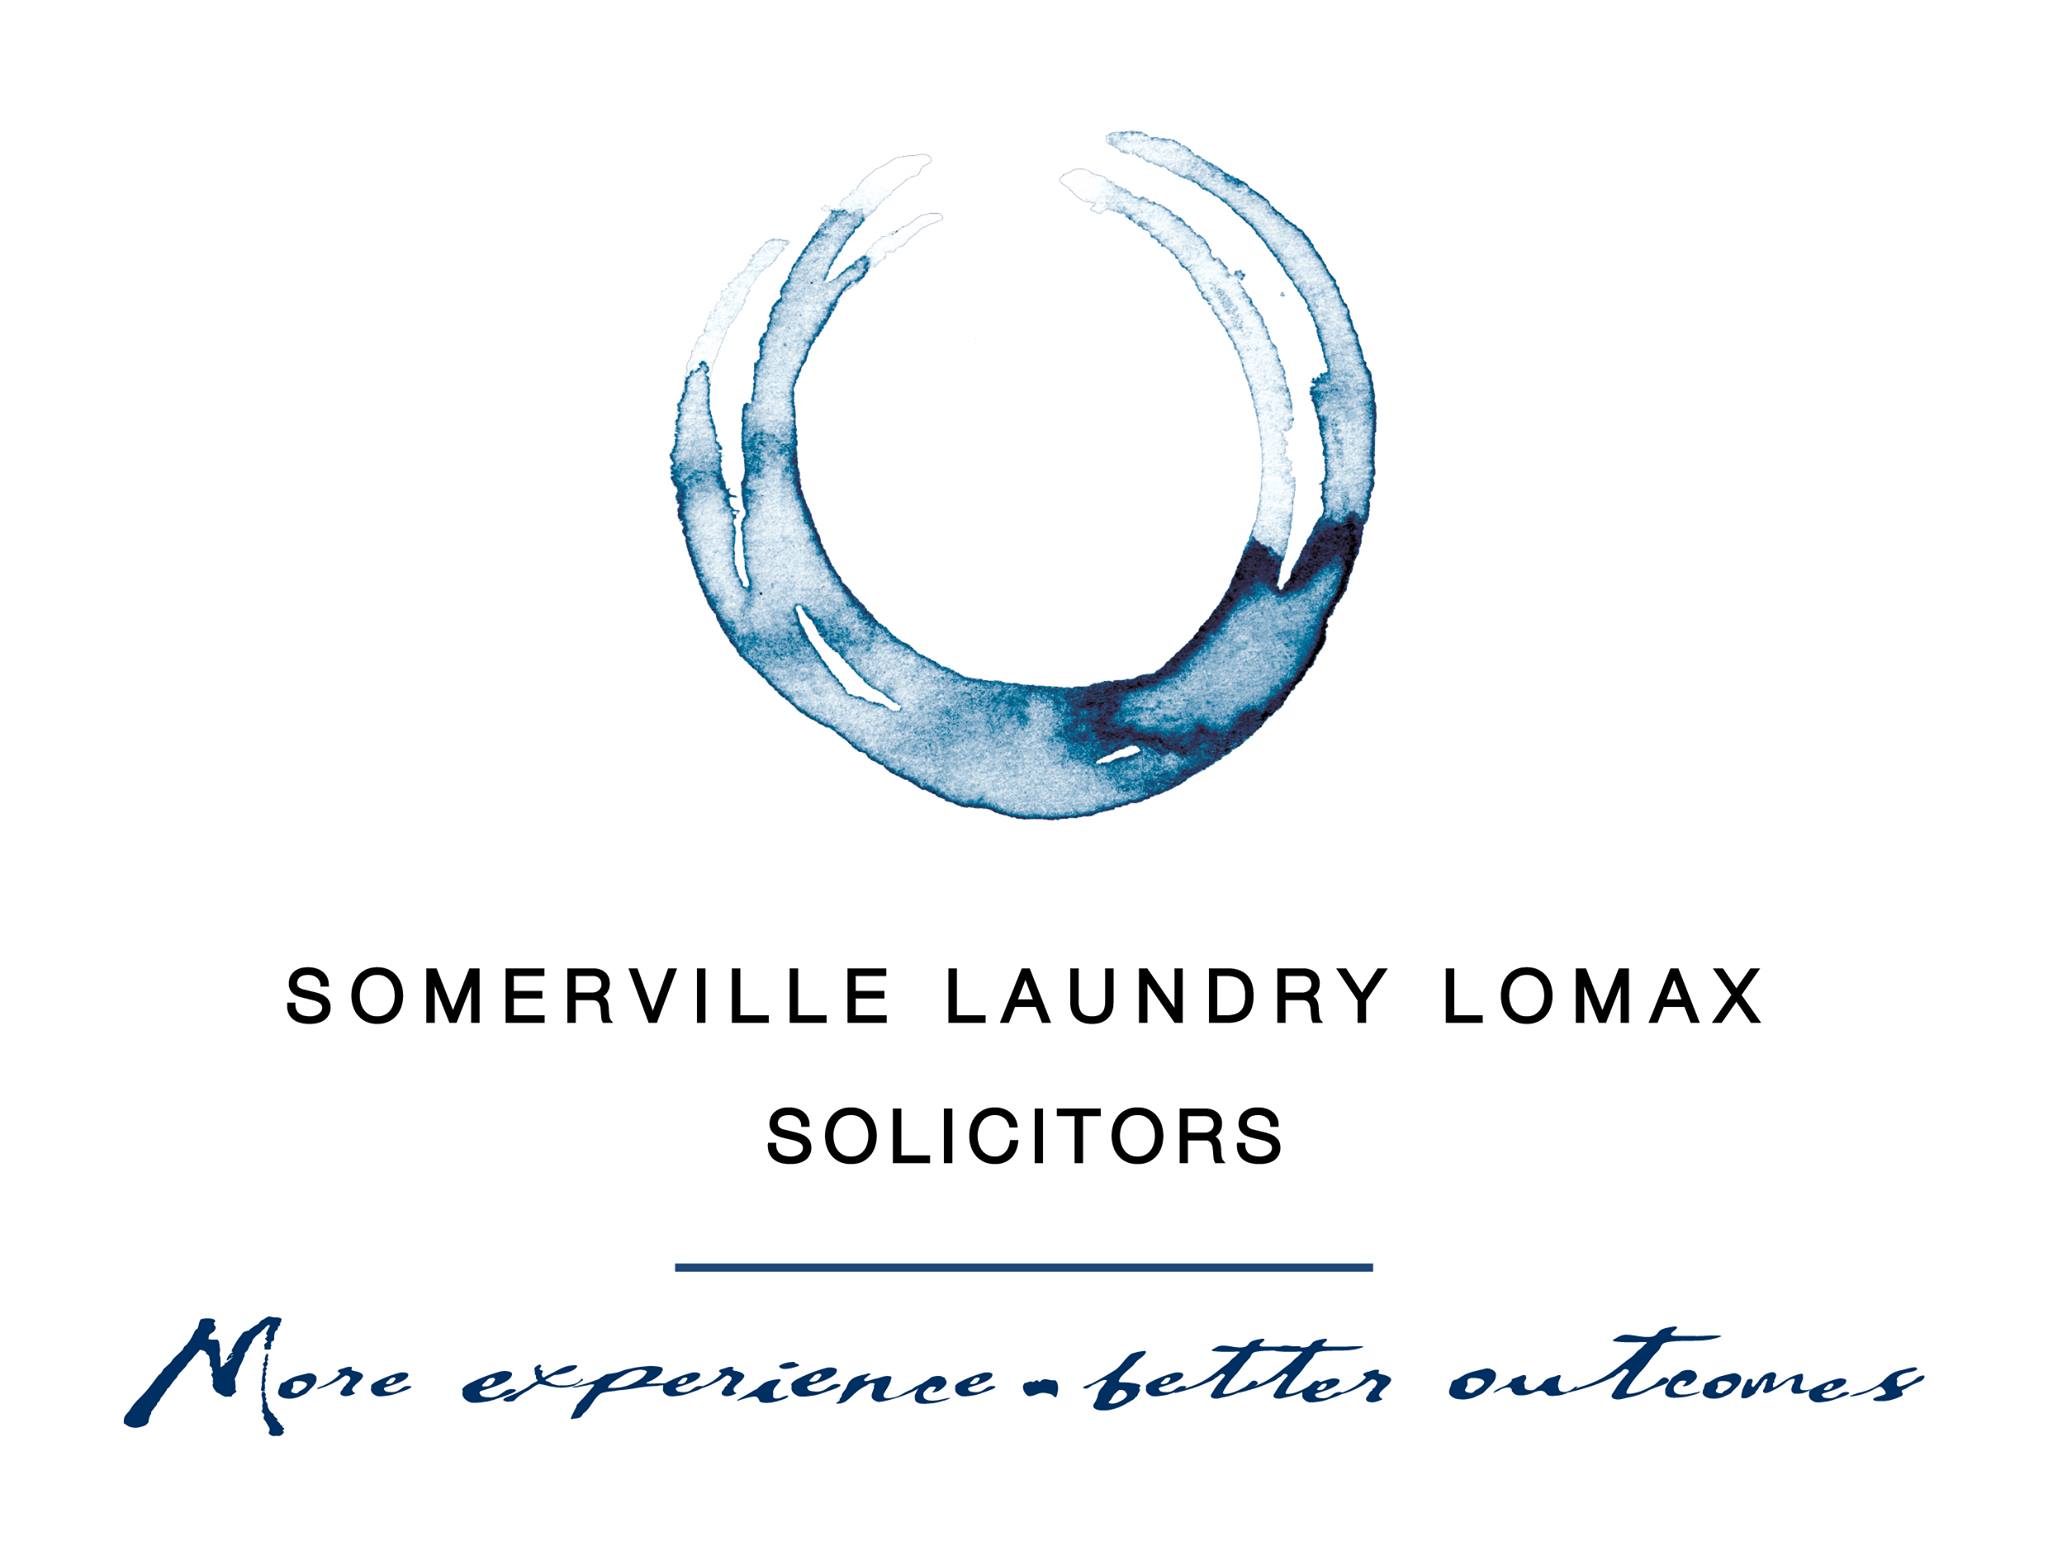 Business logo of Somerville Laundry Lomax